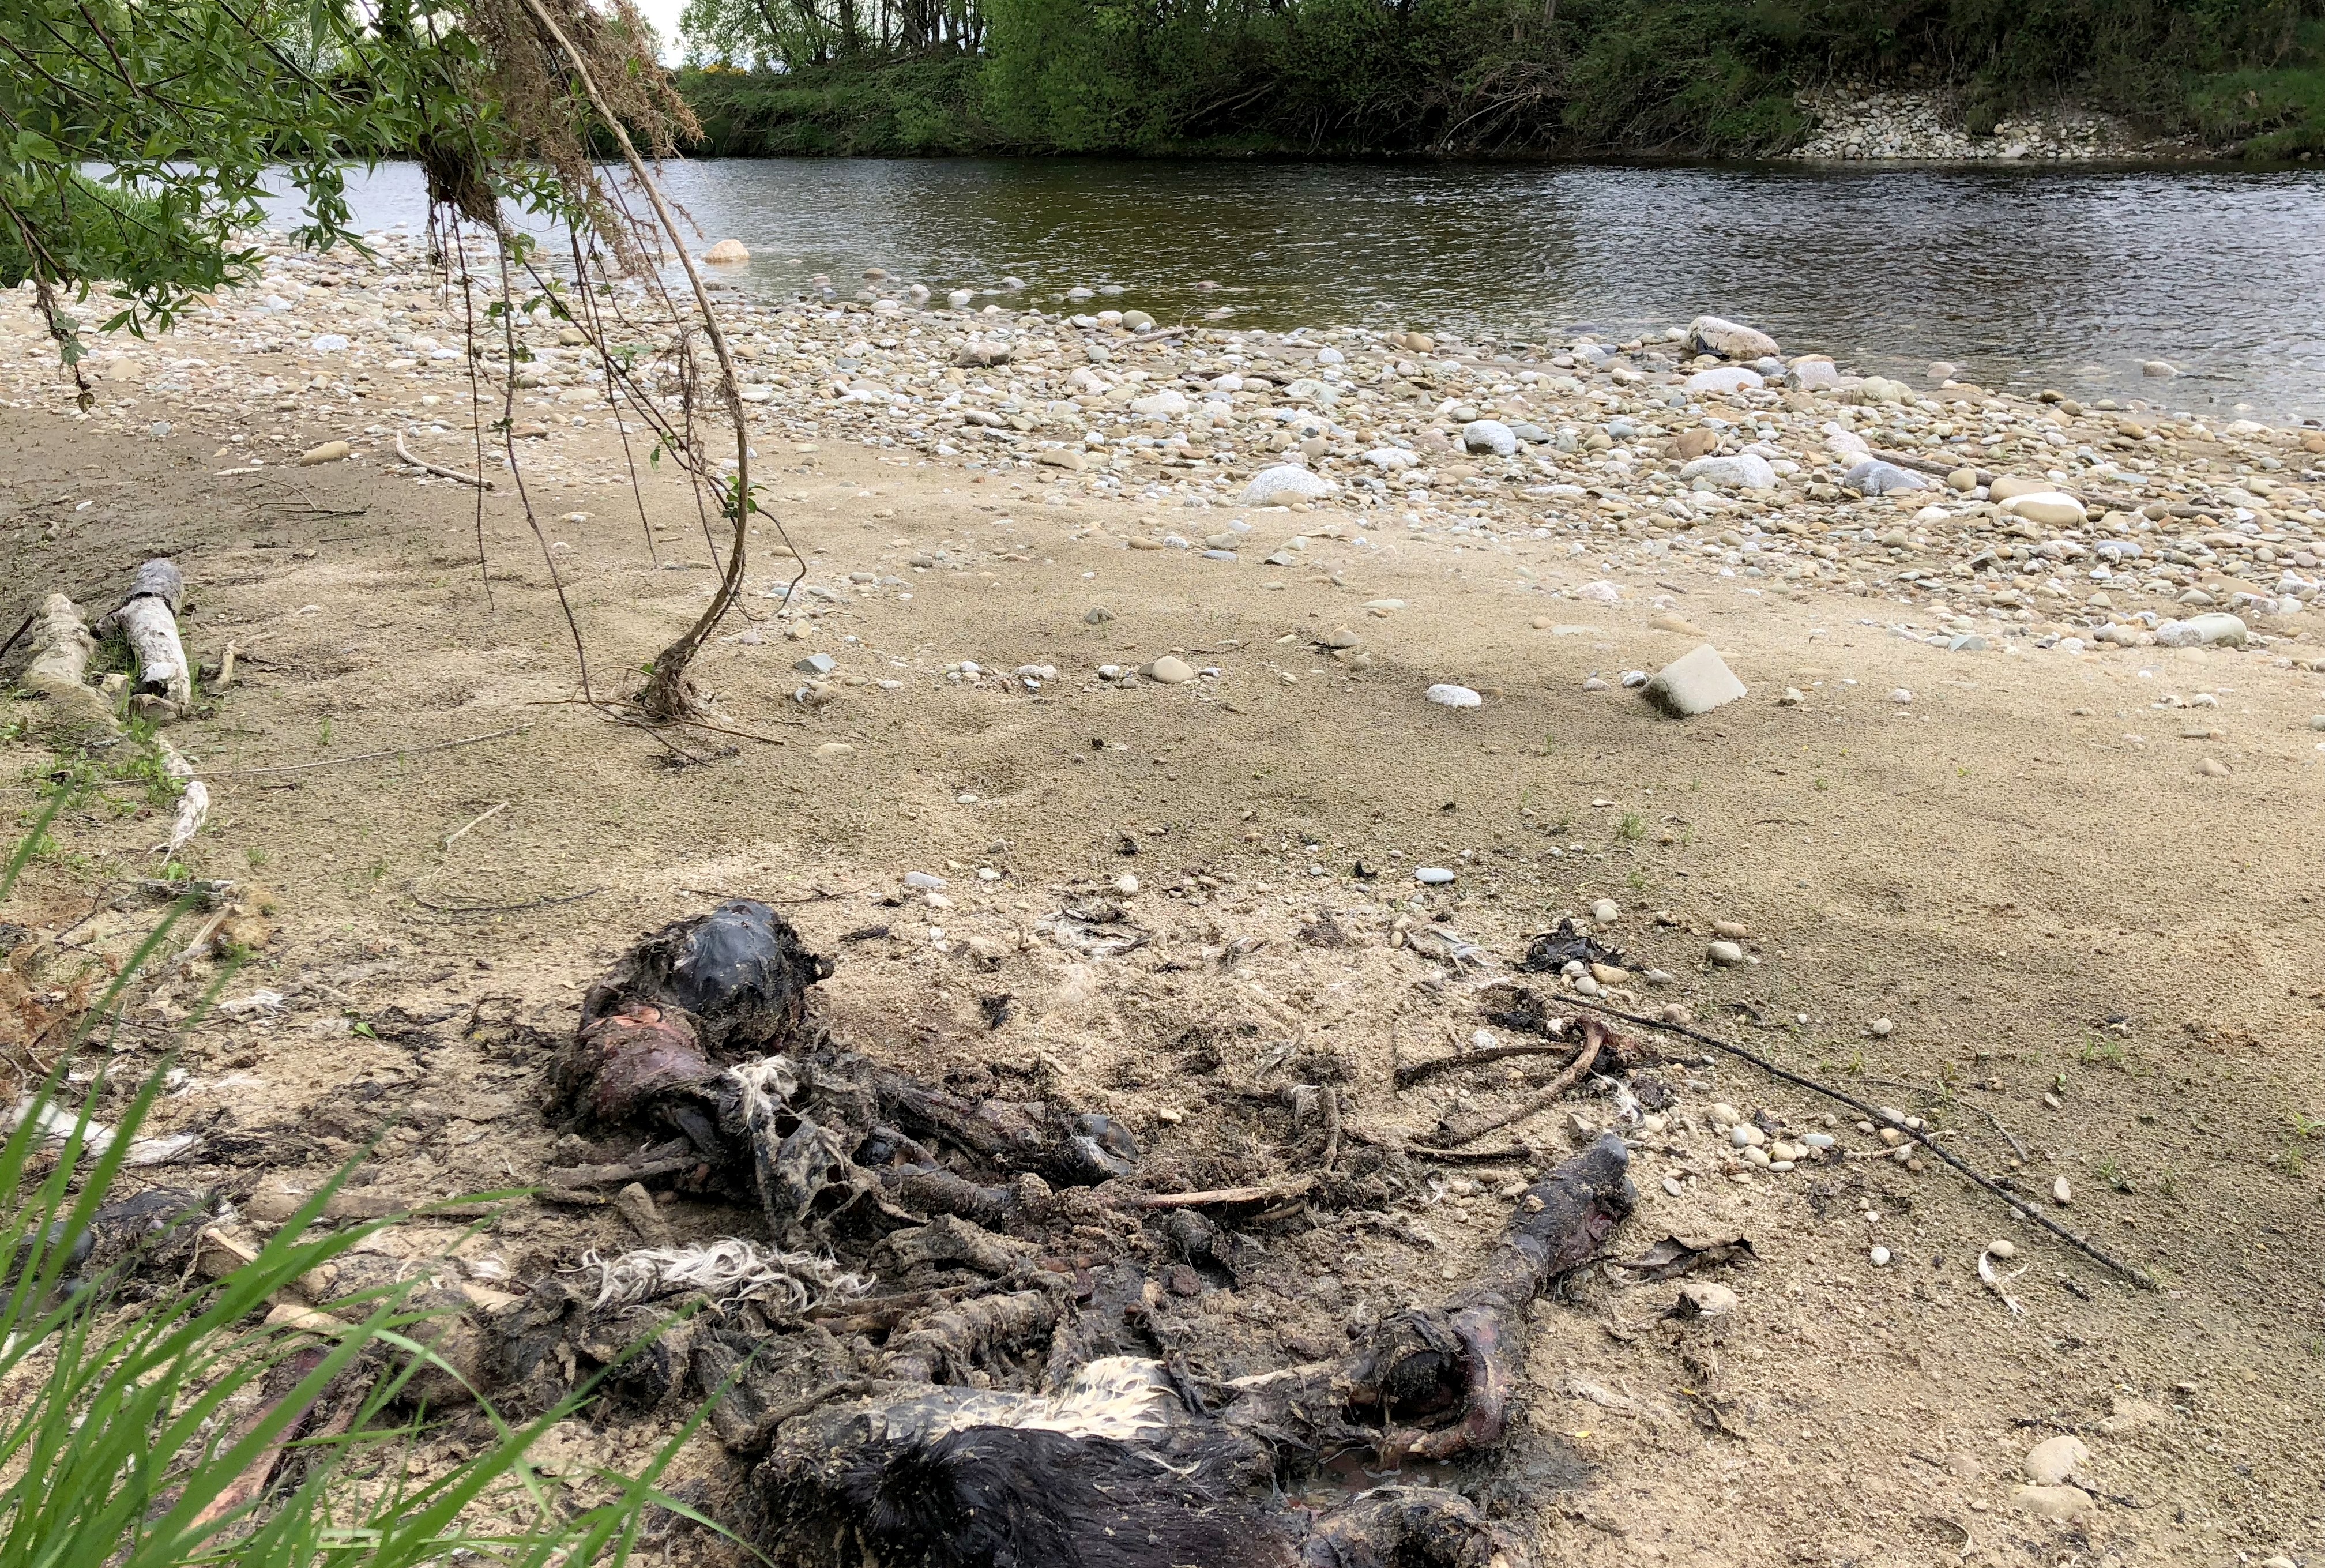 Cattle remains in the creek bed.